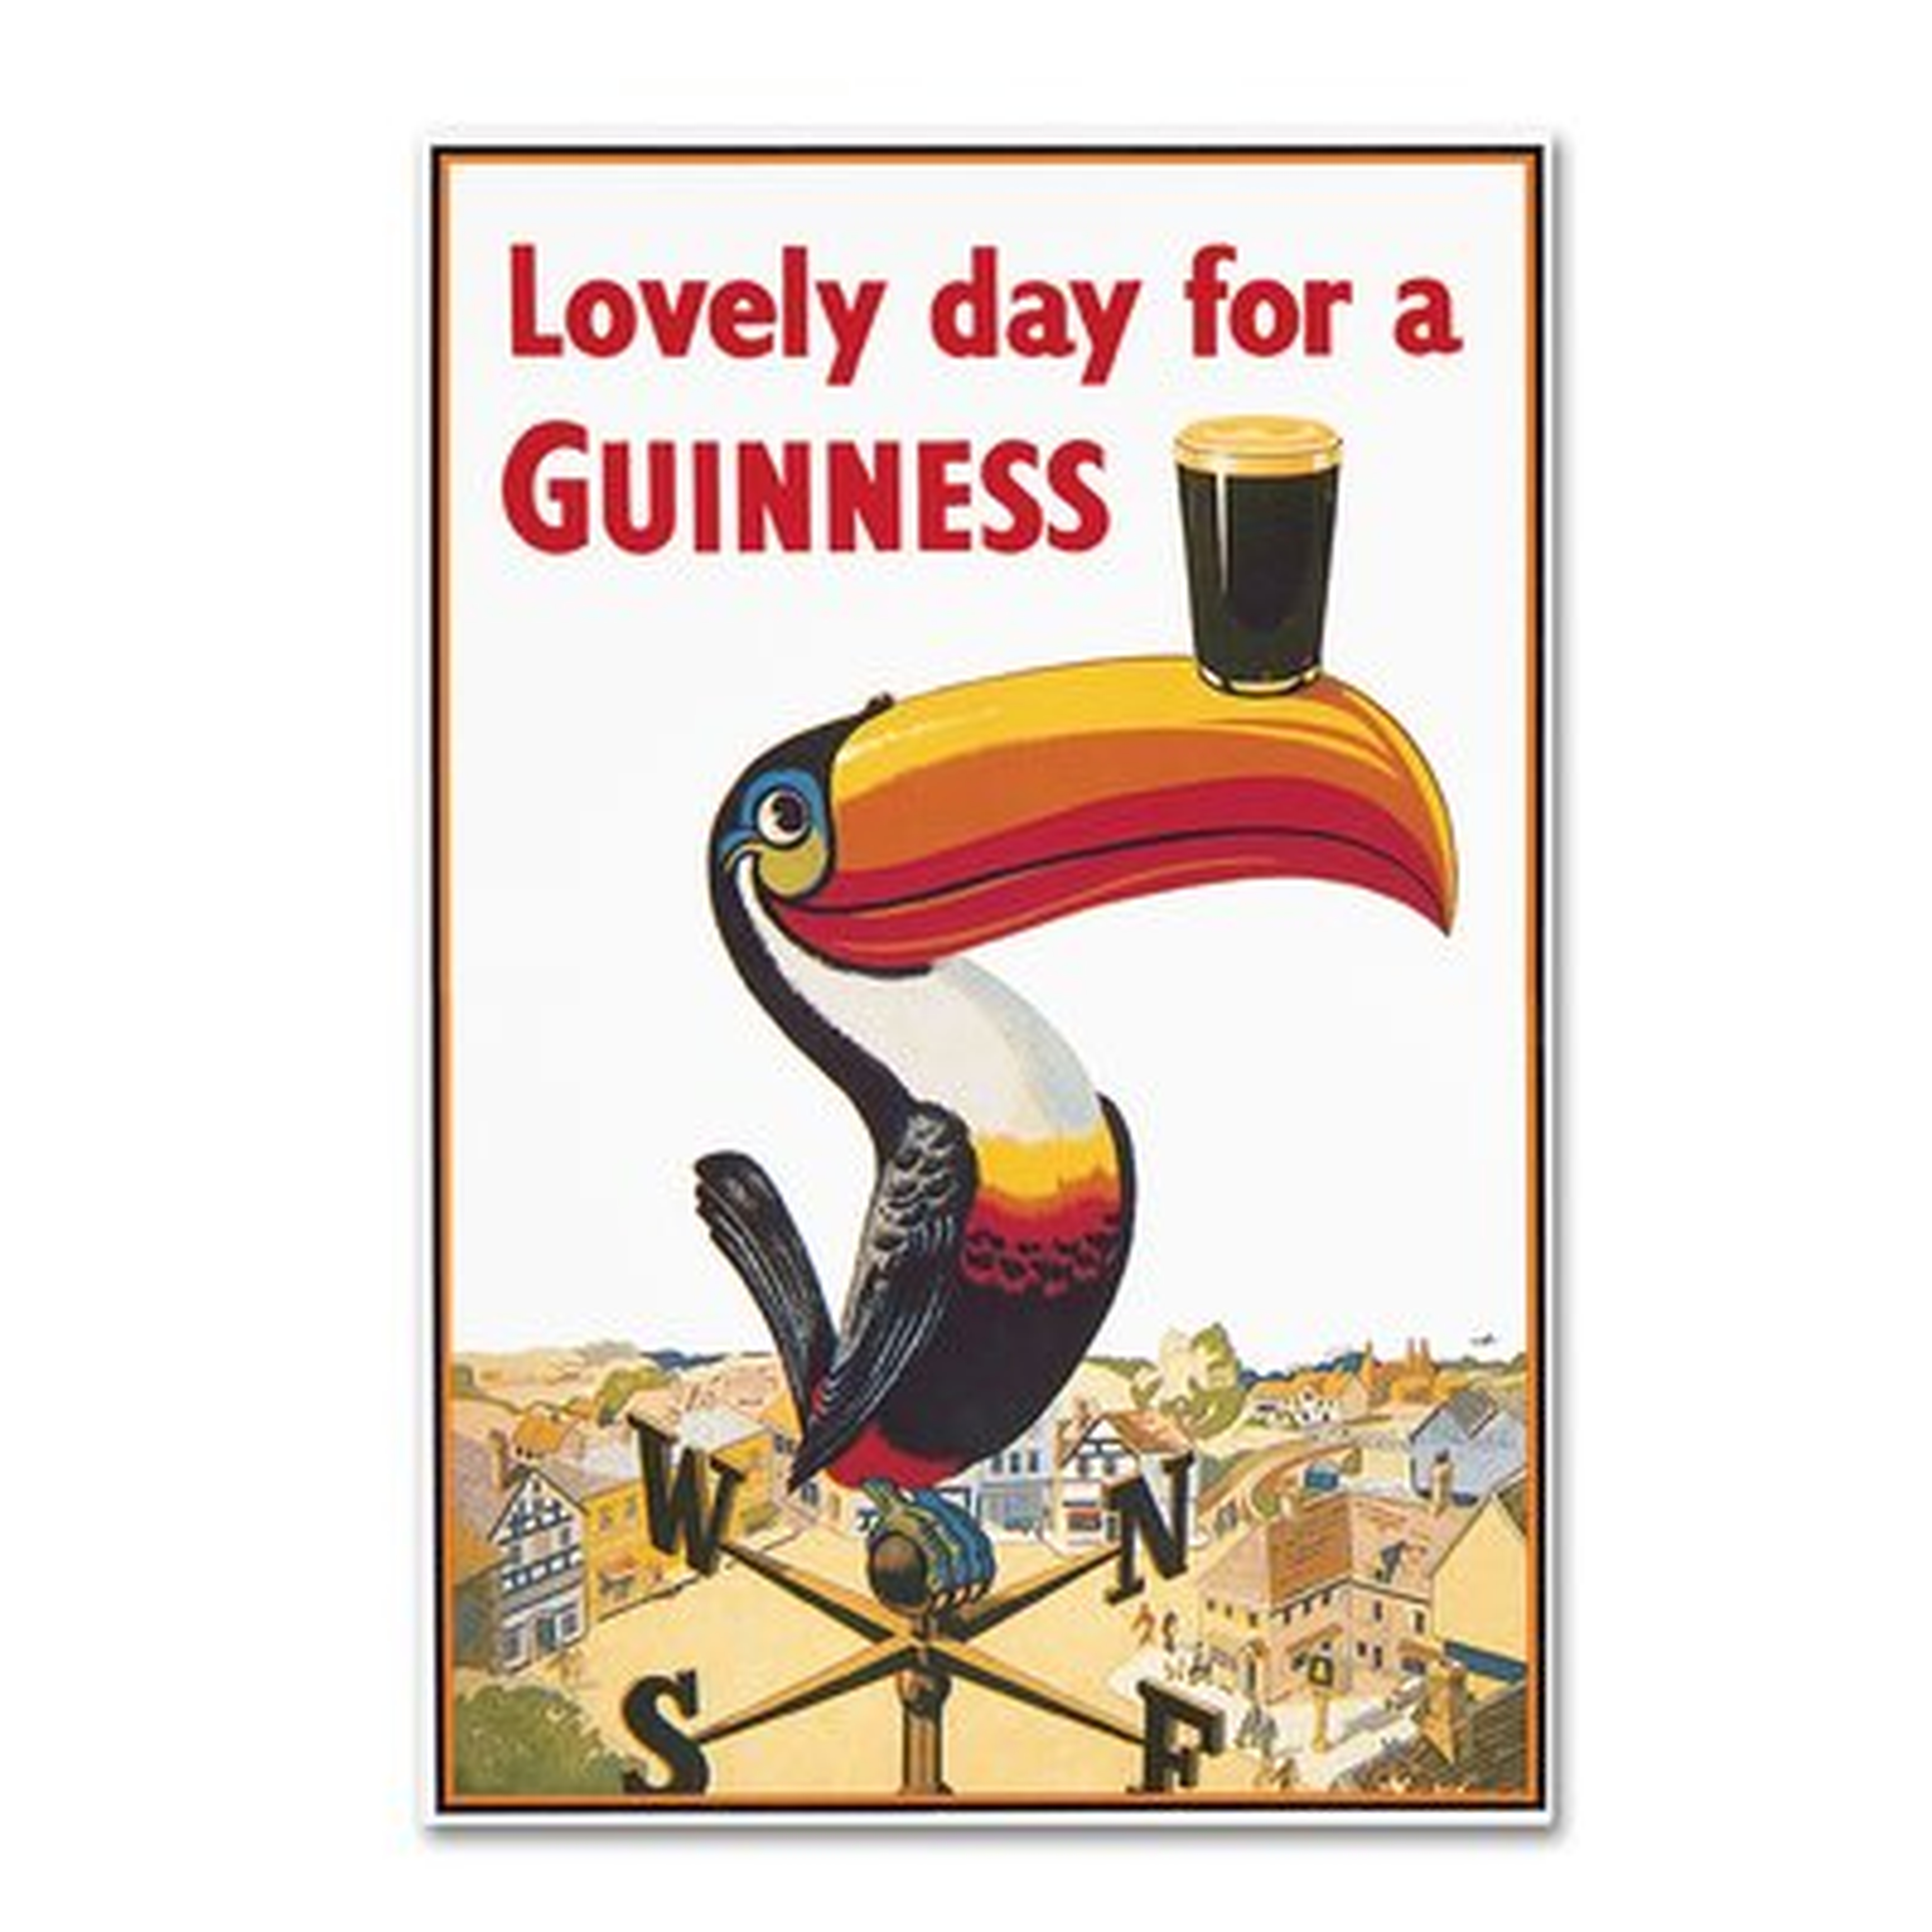 Lovely Day For A Guinness VIII" by Guinness Brewery Vintage Advertisement on Wrapped Canvas - Wayfair